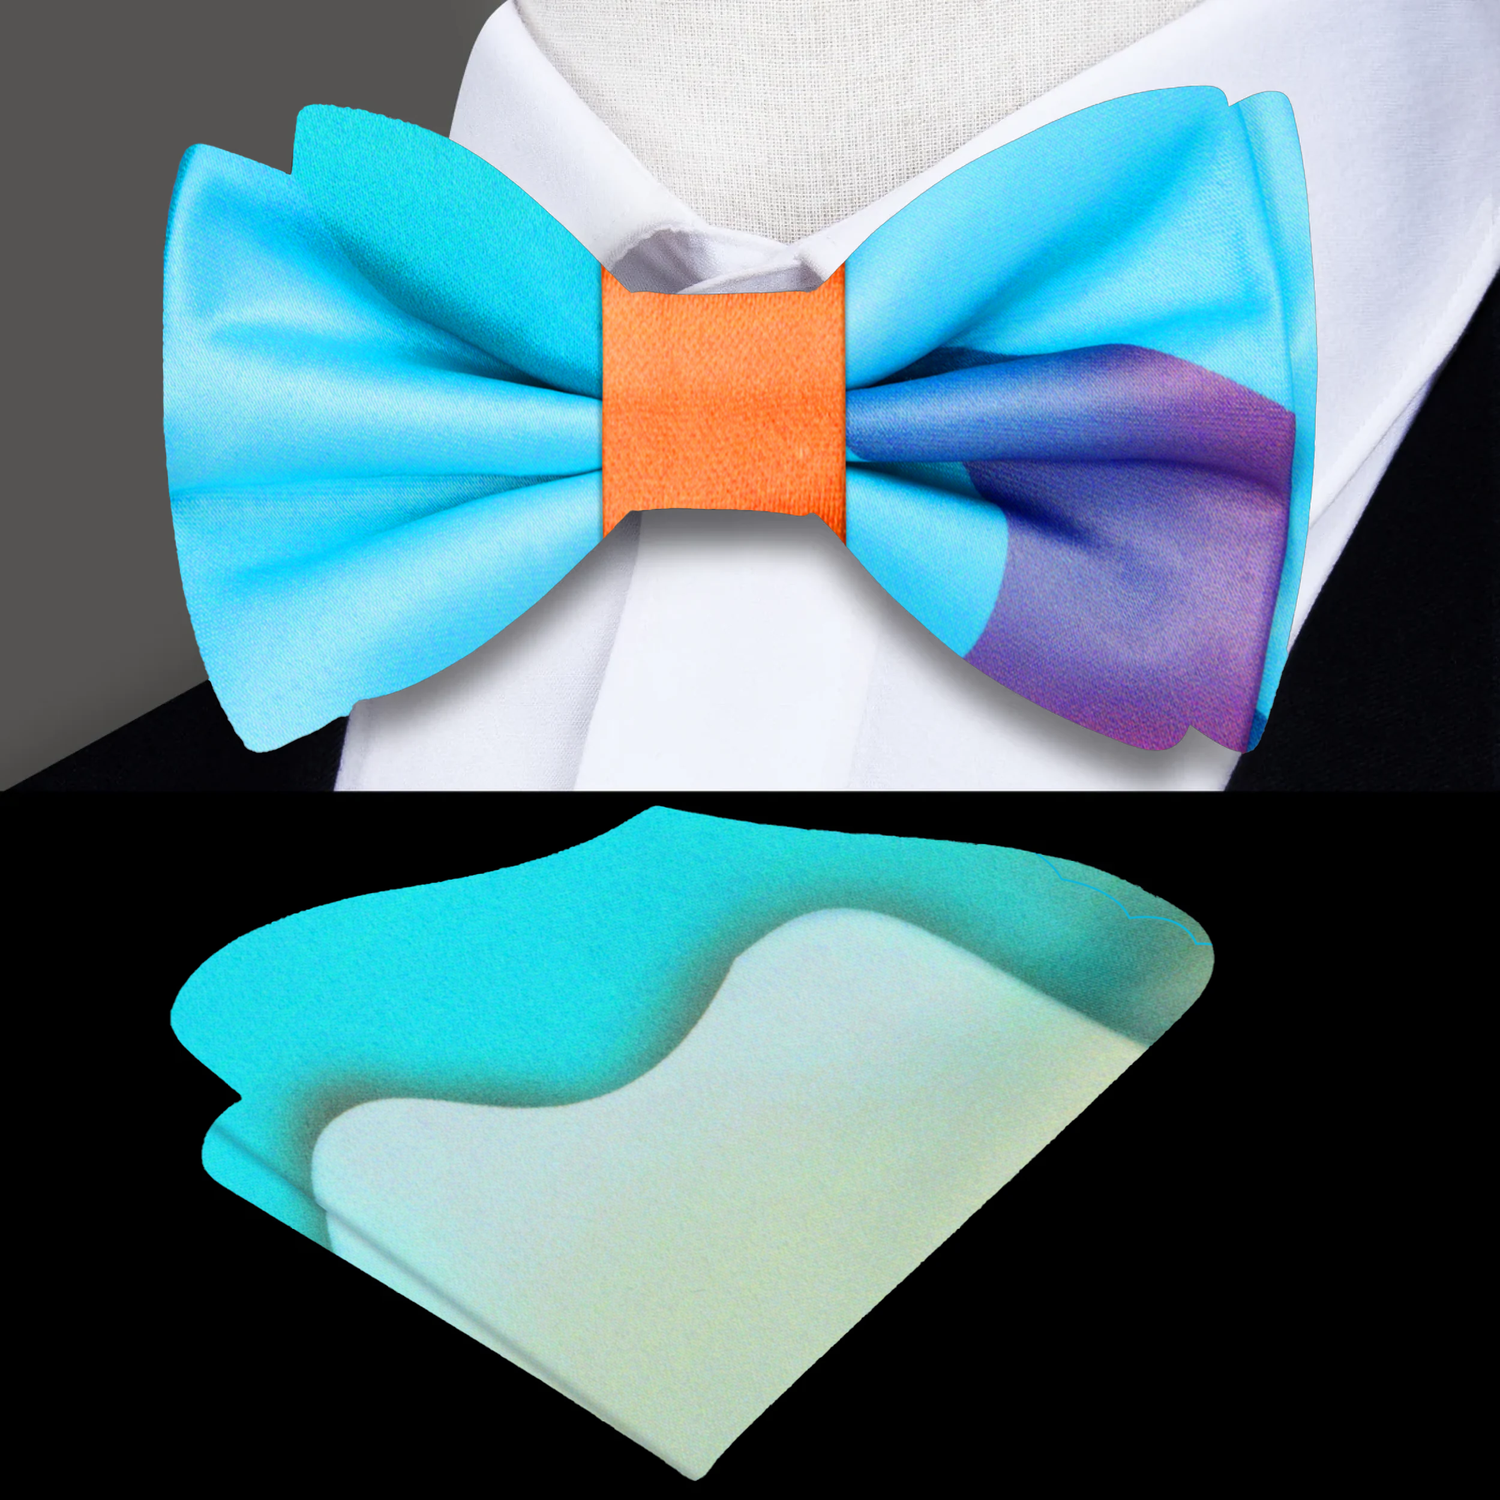 Colorful It’s Melting Bow Tie and Square